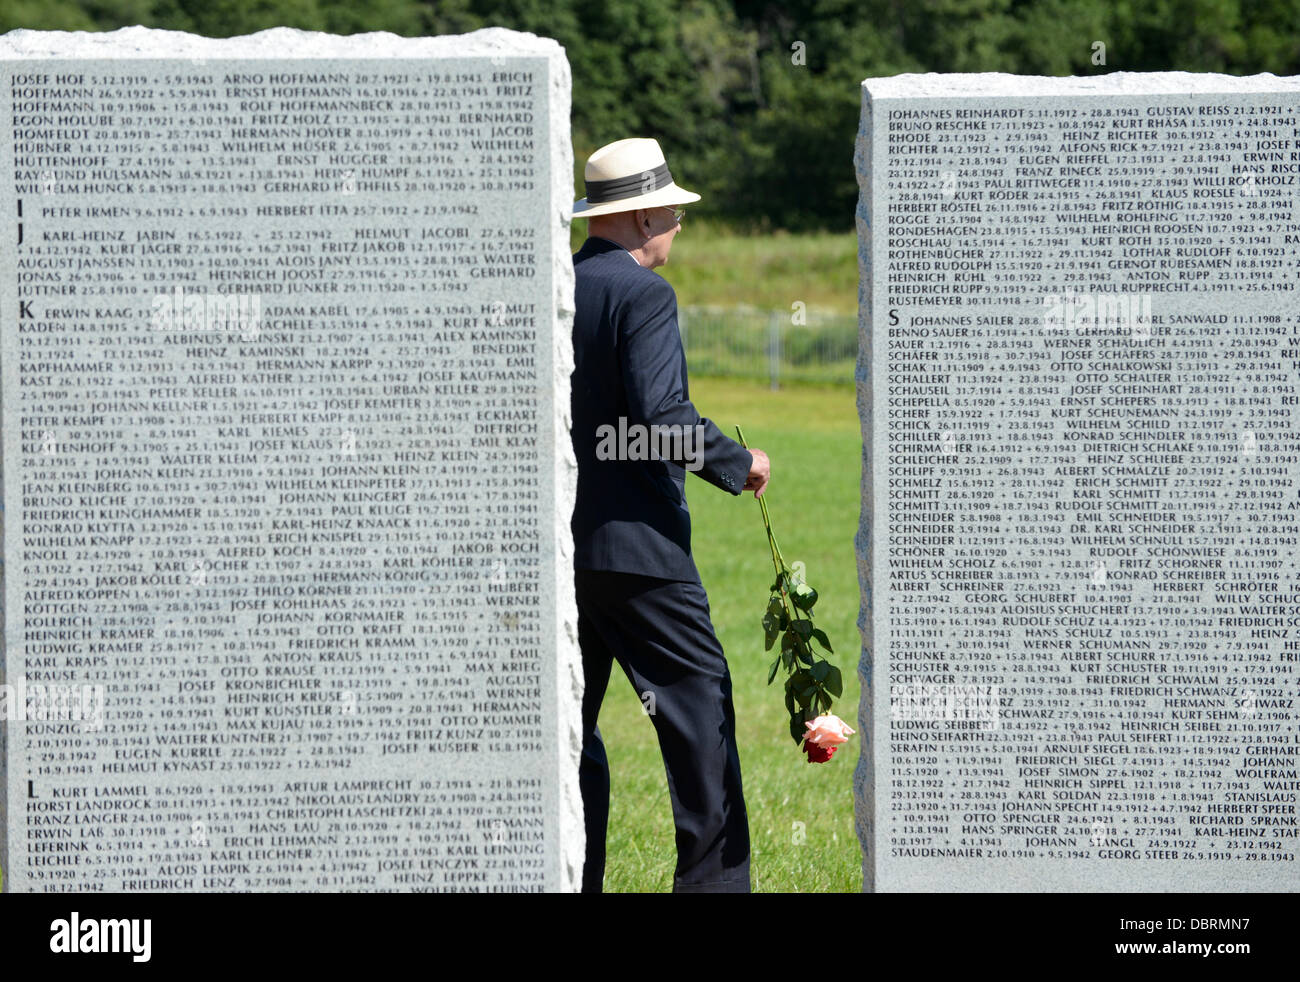 A relative stands with a rose at a granite slab with the names of fallen German soldiers during the dedication of the German military cemetery in Dukhovshchina, Smolensk Oblast, Russia, 03 August 2013. The cemetery is the last resting place for 70,000 German soldiers who died in Russia during World War II. Photo: UWE ZUCCHI Stock Photo